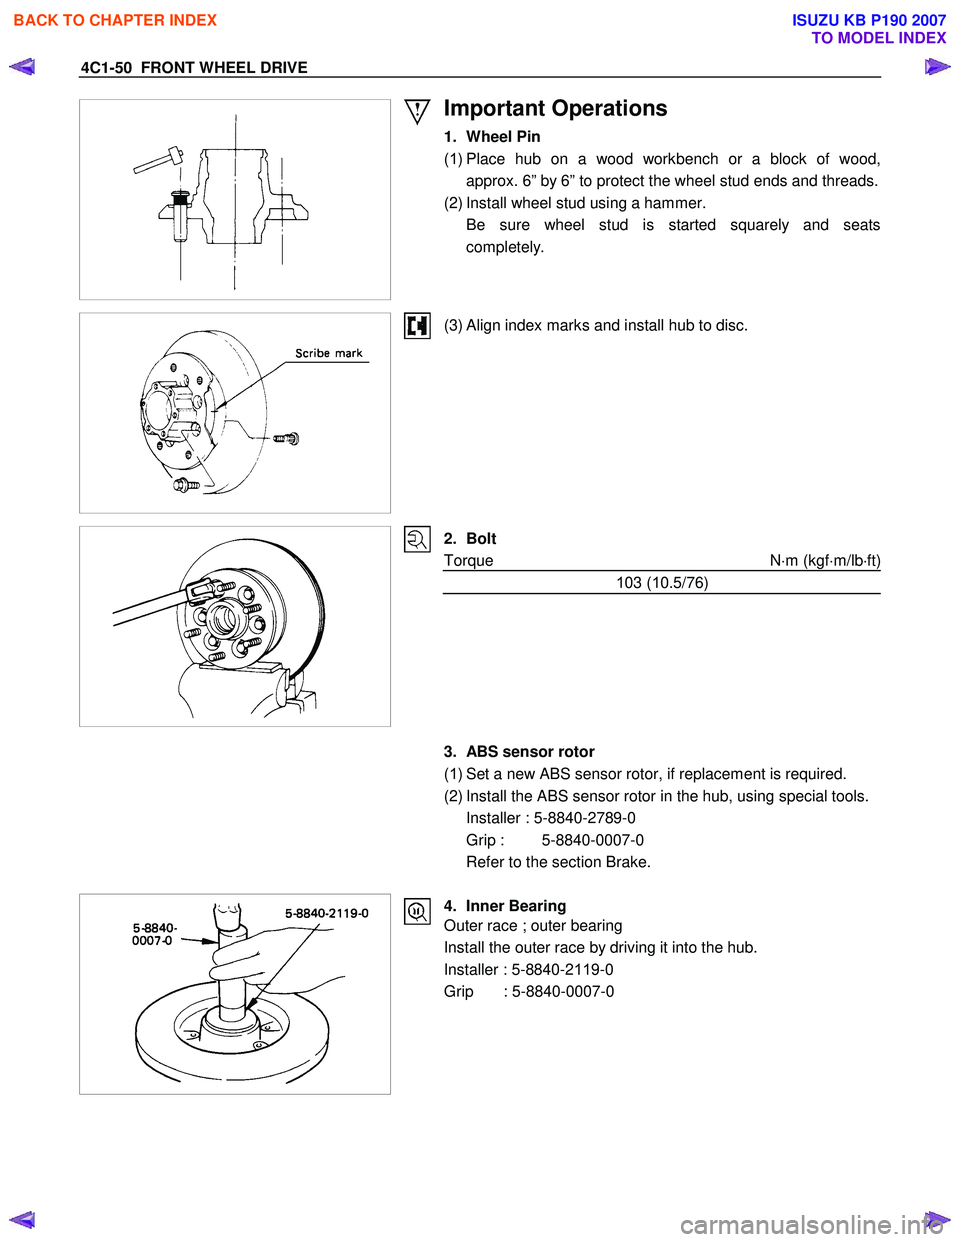 ISUZU KB P190 2007  Workshop Repair Manual 4C1-50  FRONT WHEEL DRIVE 
 
 
Important Operations 
1. Wheel Pin  
( 1 ) Place hub on a wood workbench or a block of wood,
approx. 6” by 6” to protect the wheel stud ends and threads.
(2) Install